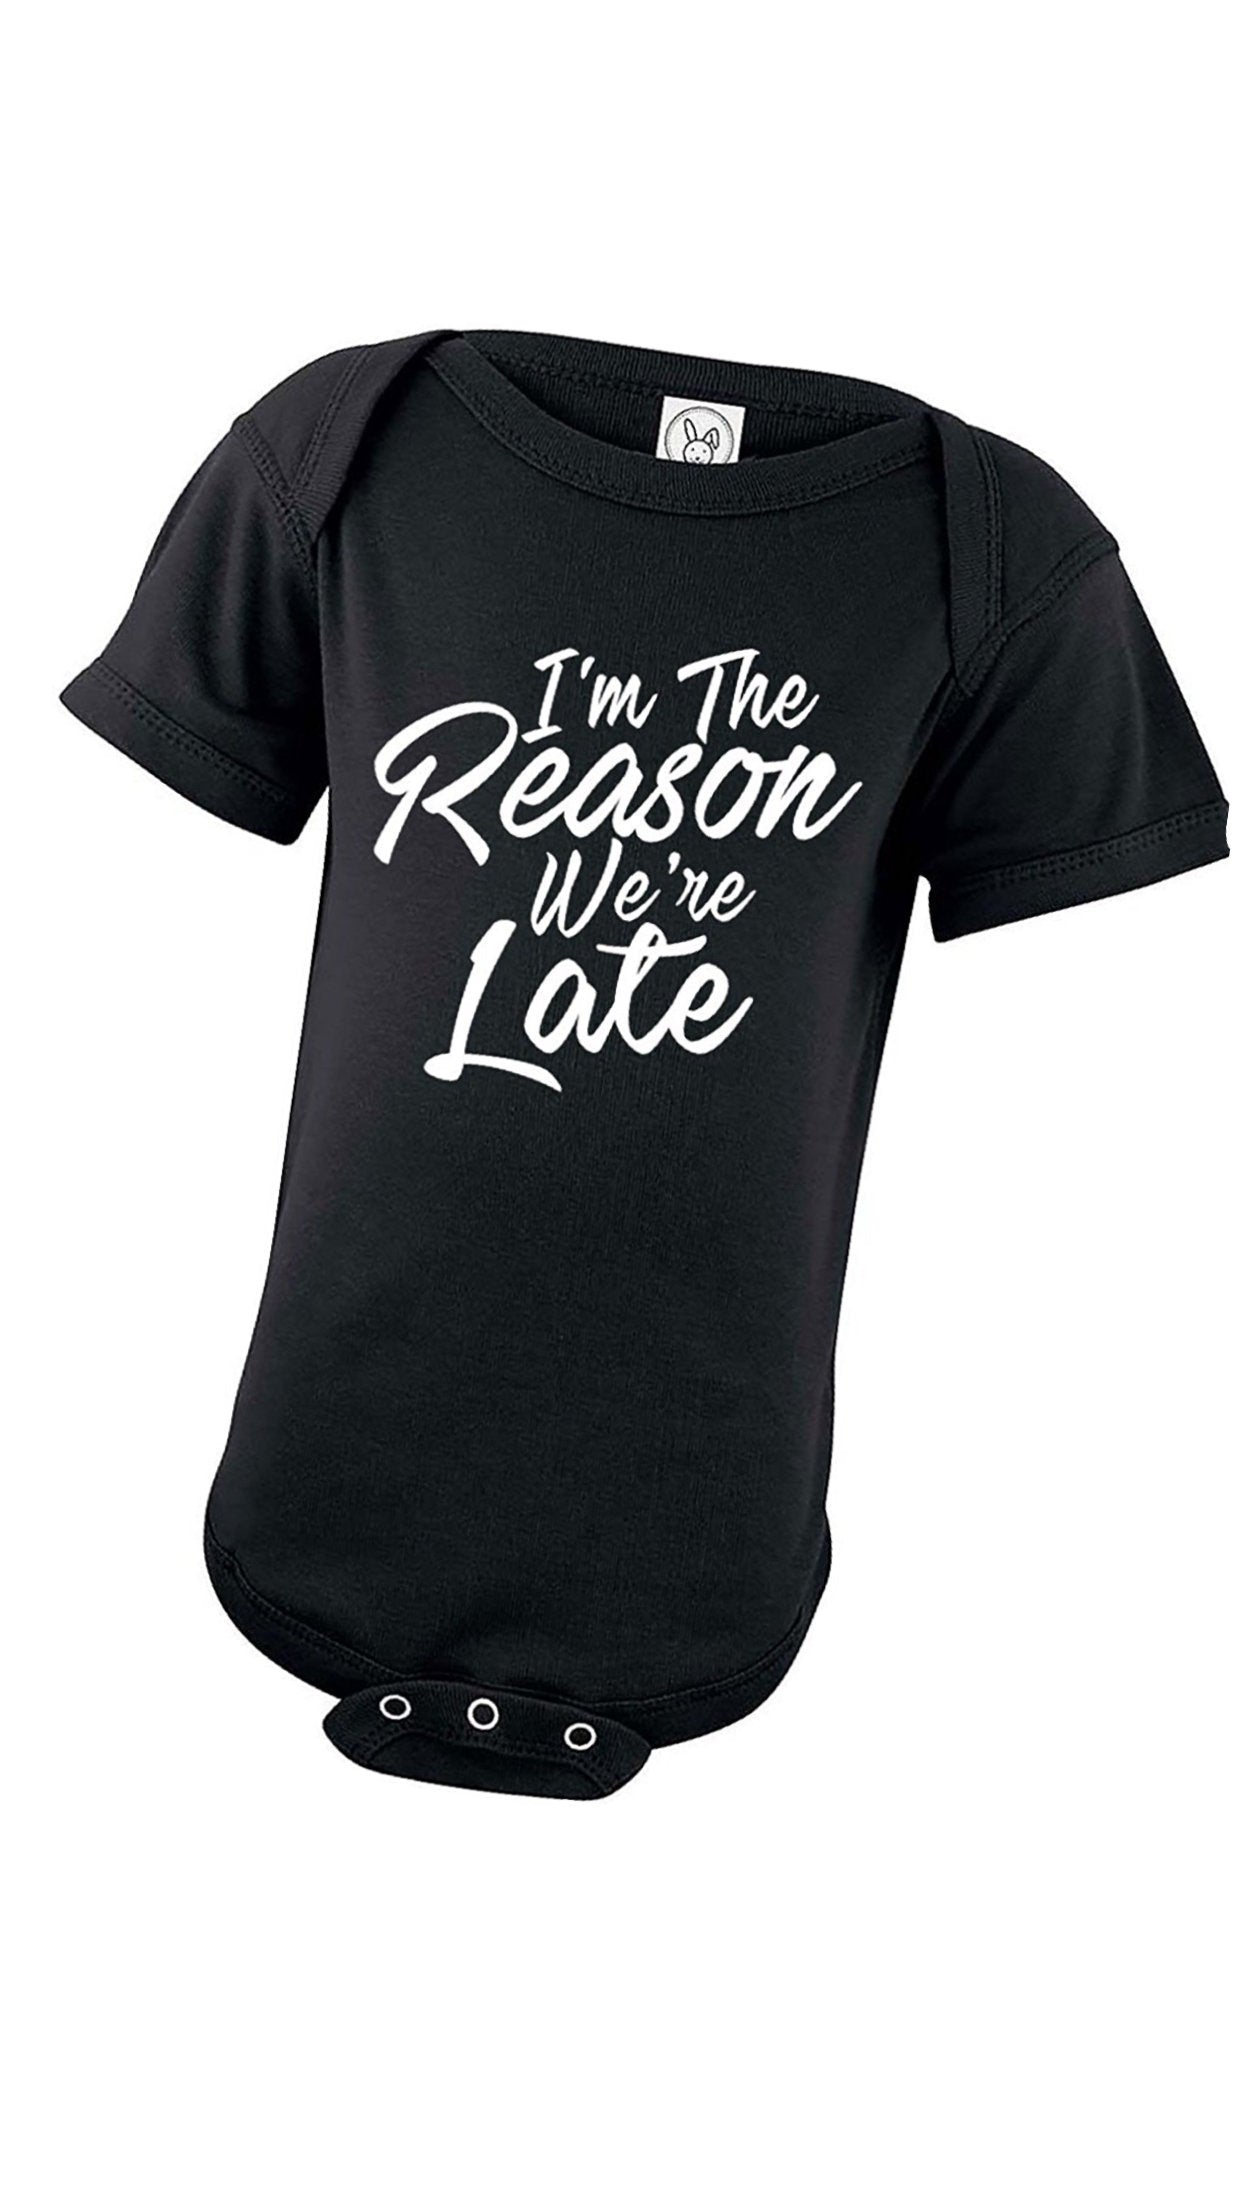 I'm the reason we're late shirt| funny shirt for the person whos always late| funny baby shirt| new mom gift| baby shower gift| funny baby t